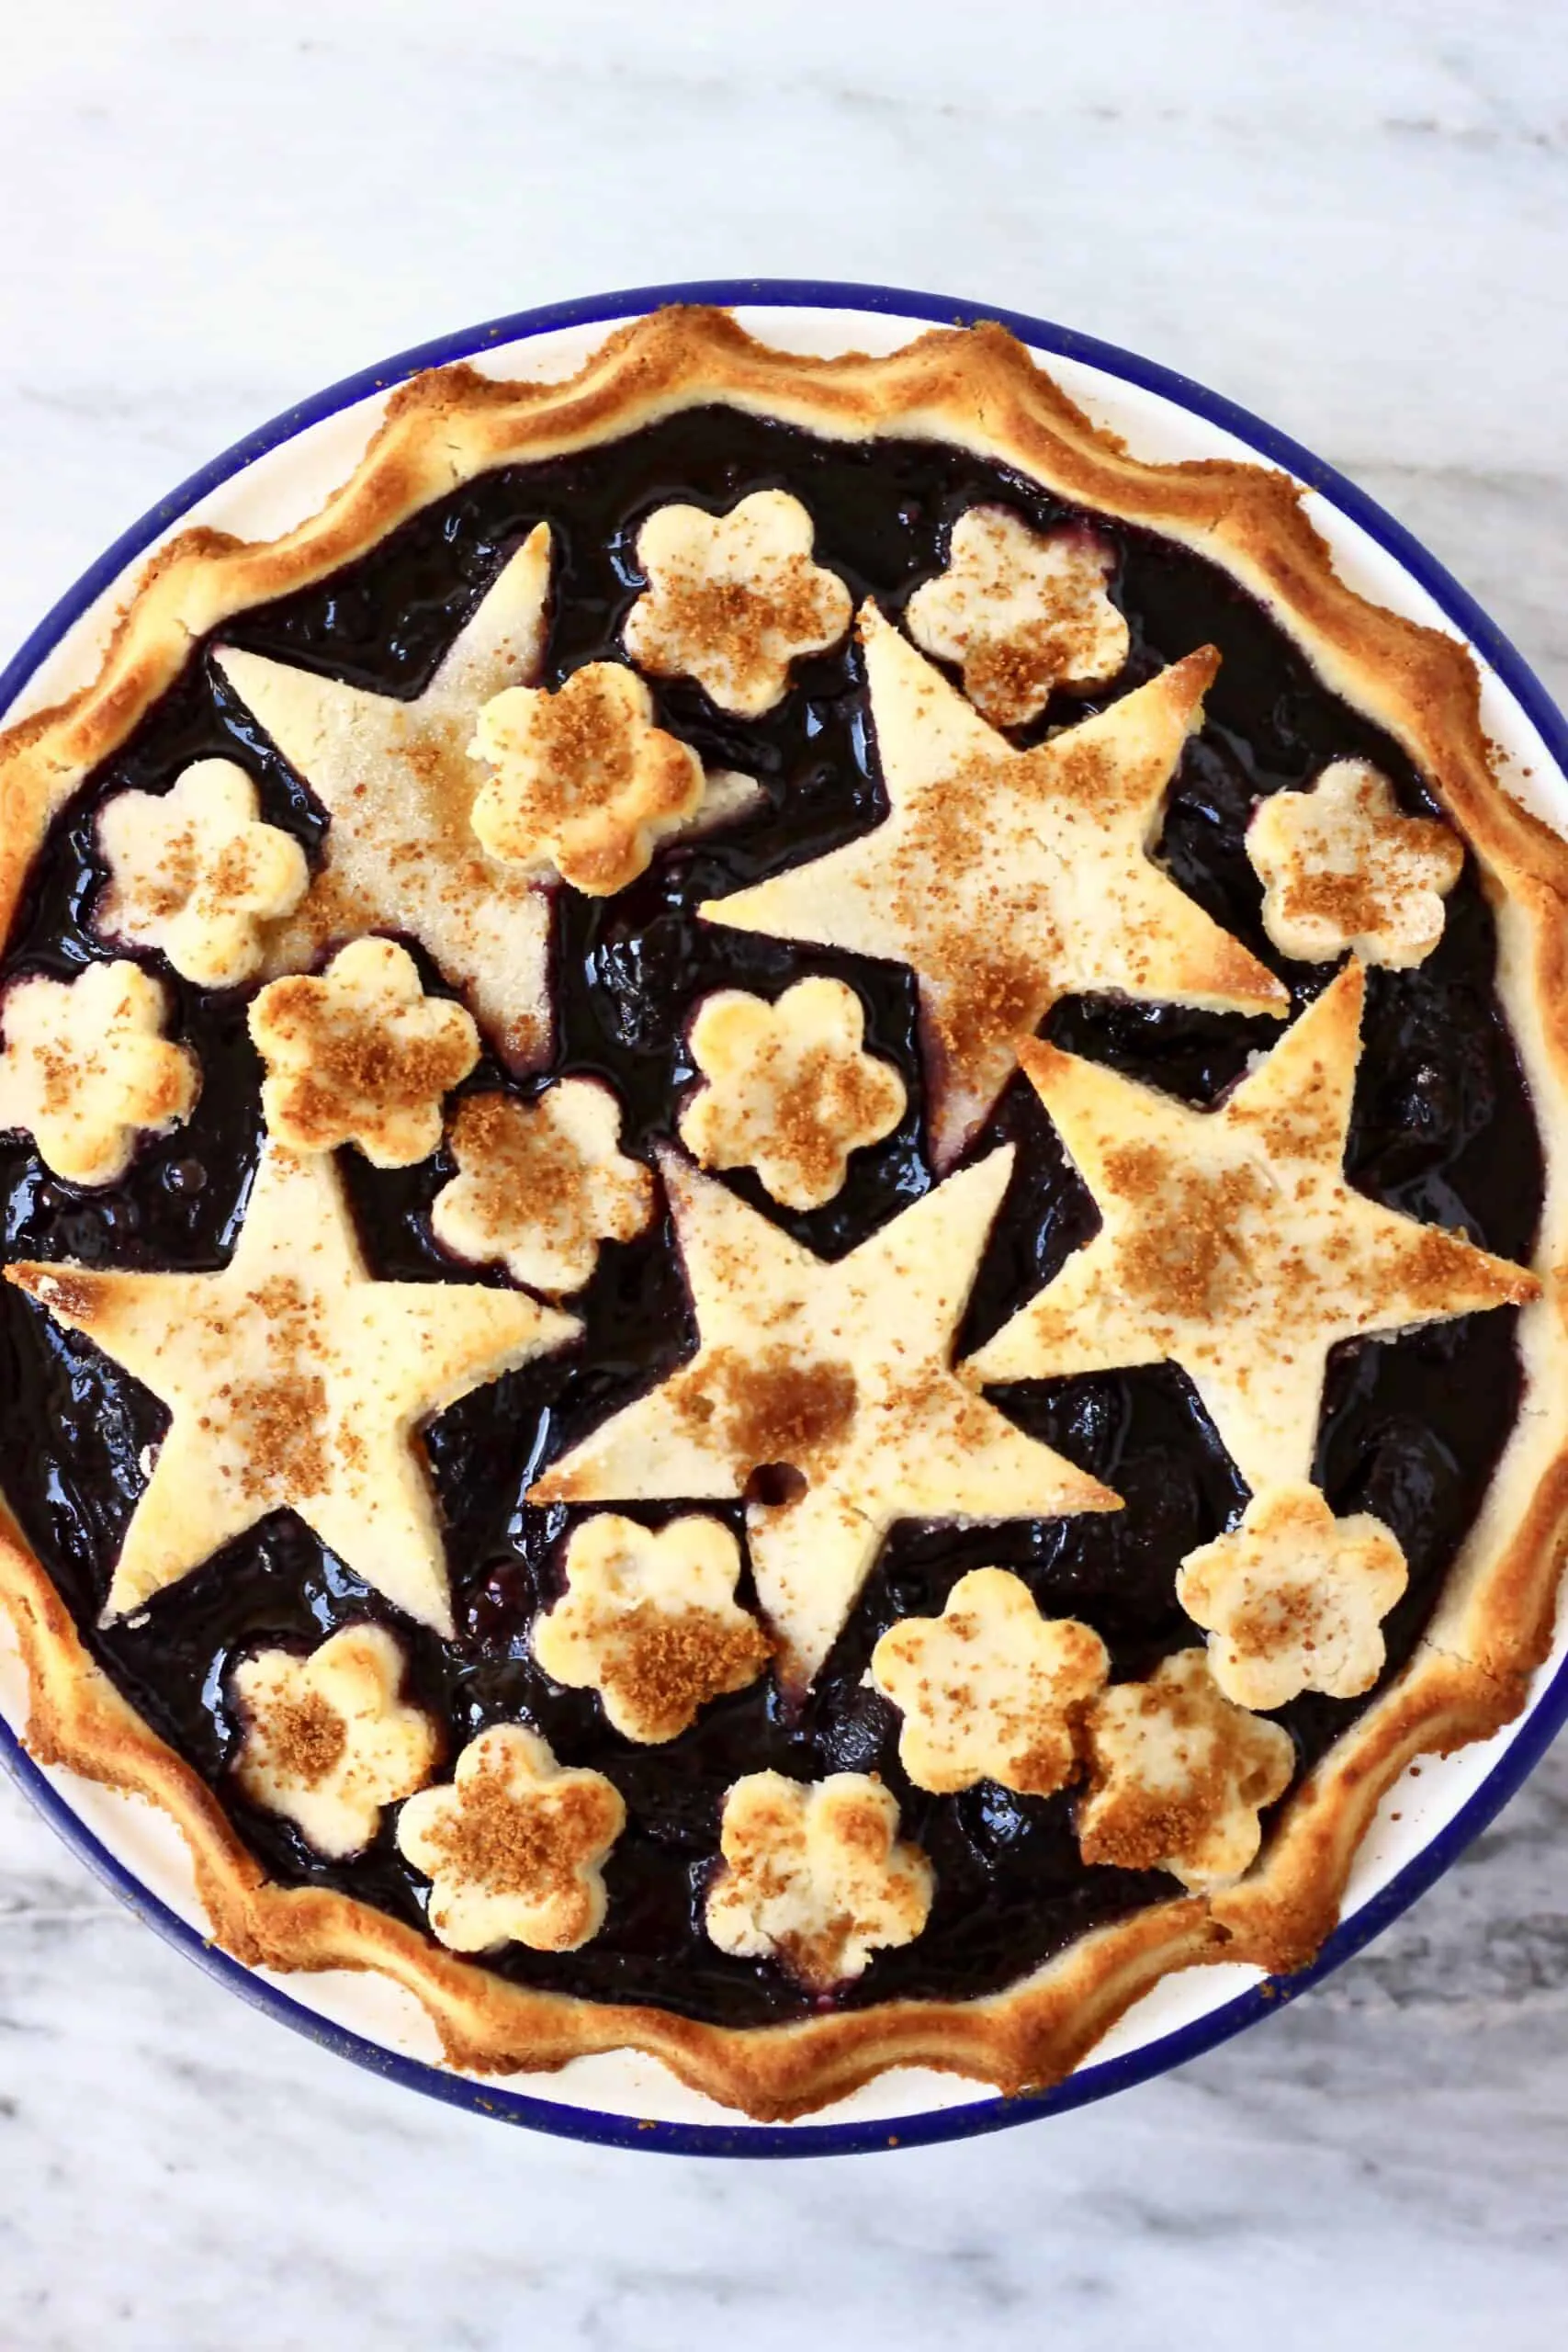 Gluten-free vegan cherry pie topped with stars and flowers in a white pie dish with a blue rim against a marble background